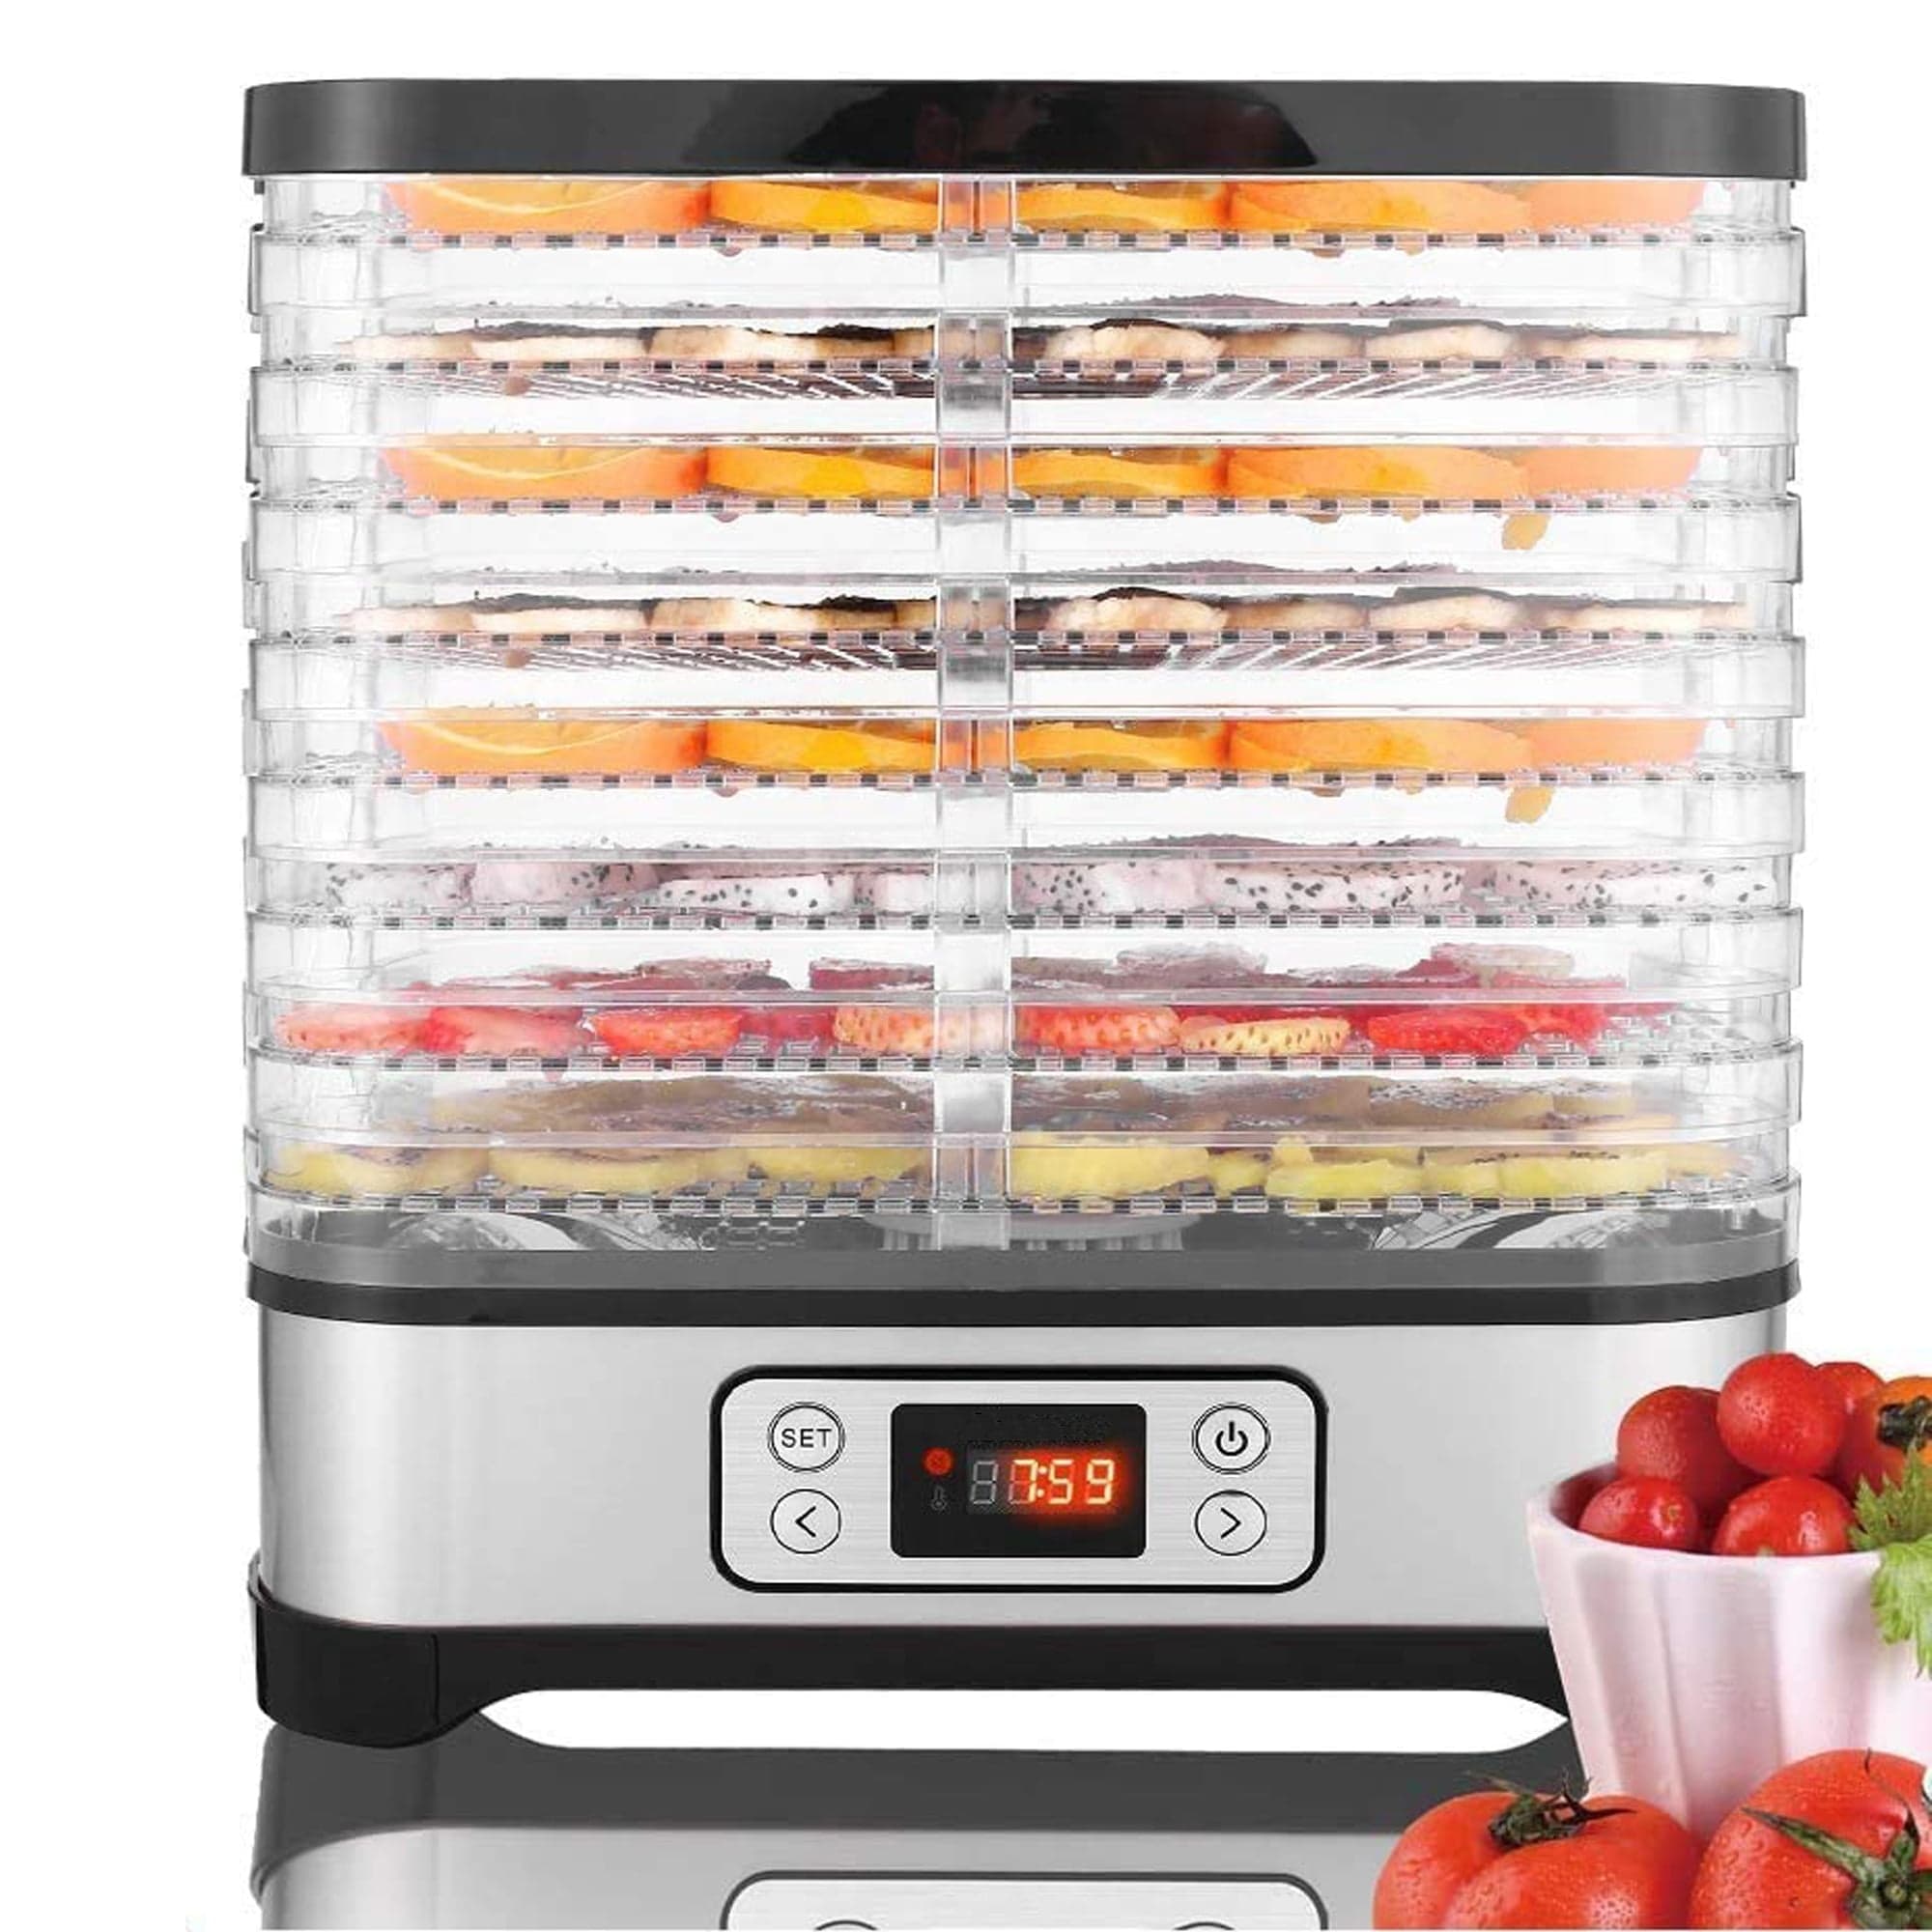 Qhomic Food Dehydrator Machine, 400W Electric Fruit Dryer with Digital  Timer and Temperature Control,8 BPA-Free Trays with Fruit Roll Sheet for  Jerky/Meat/Beef/Vegetable(Red) 